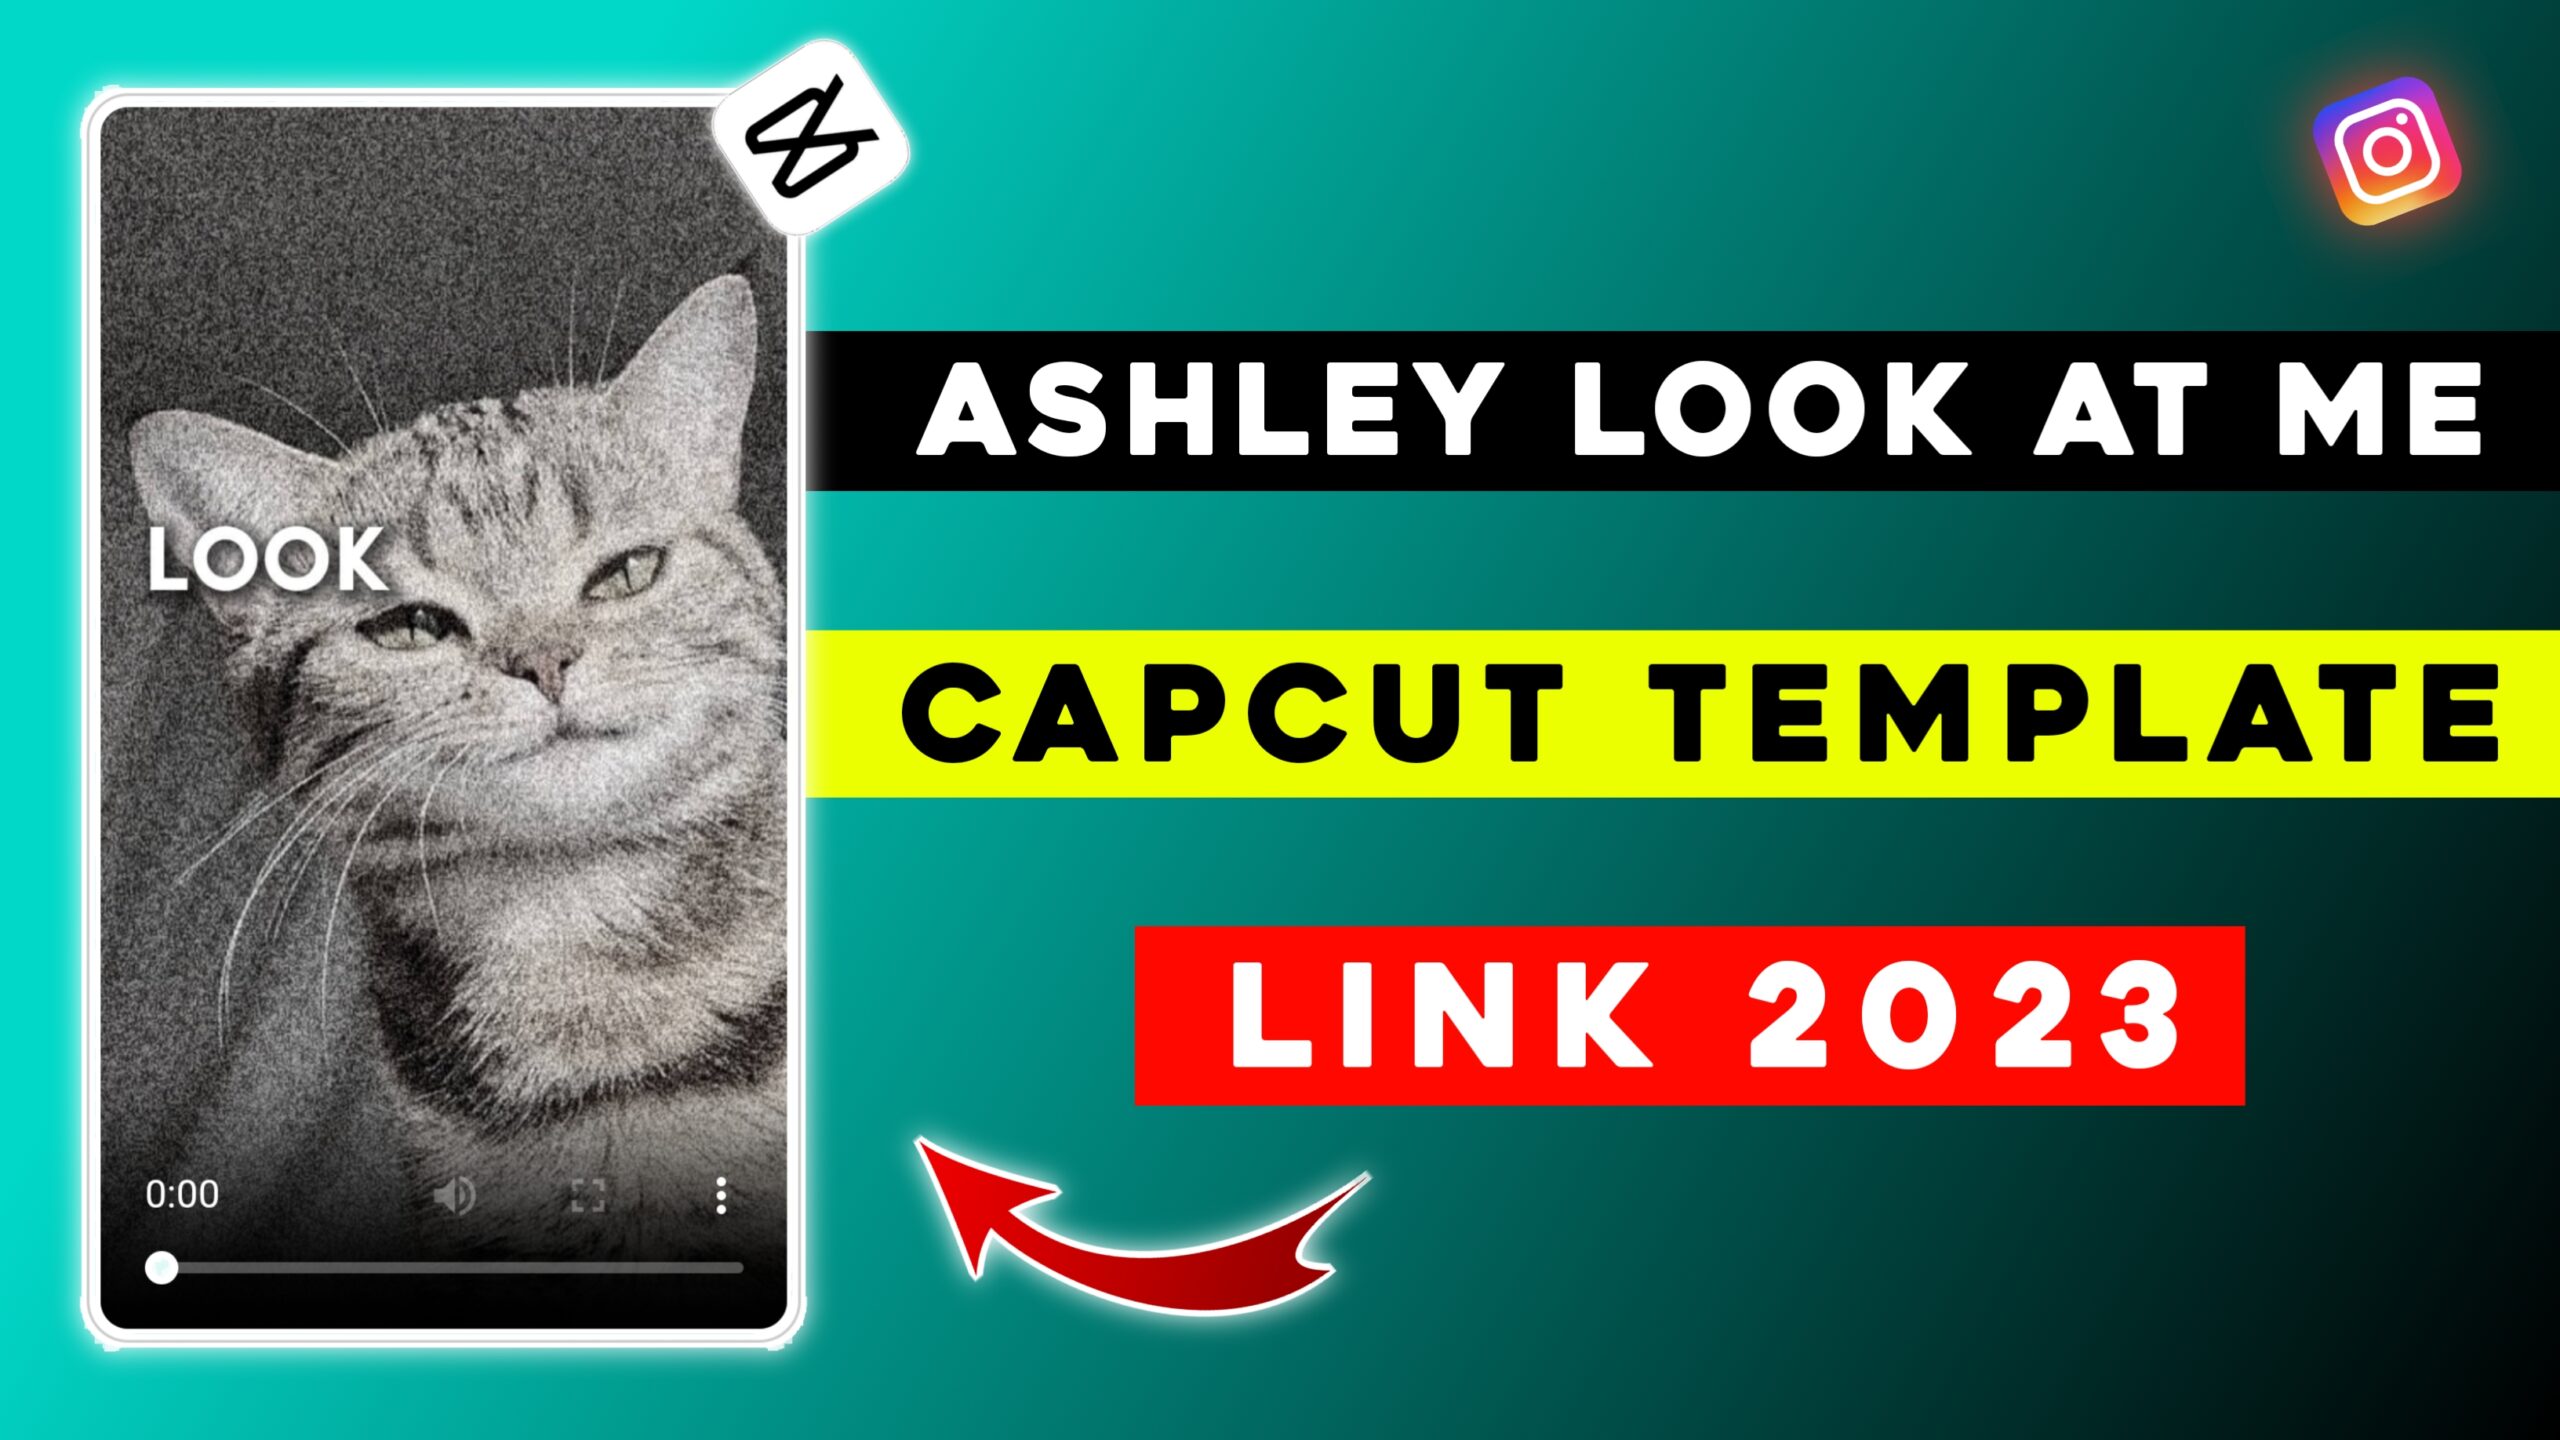 Ashley Look At Me CapCut Template Link 2023 Working Link